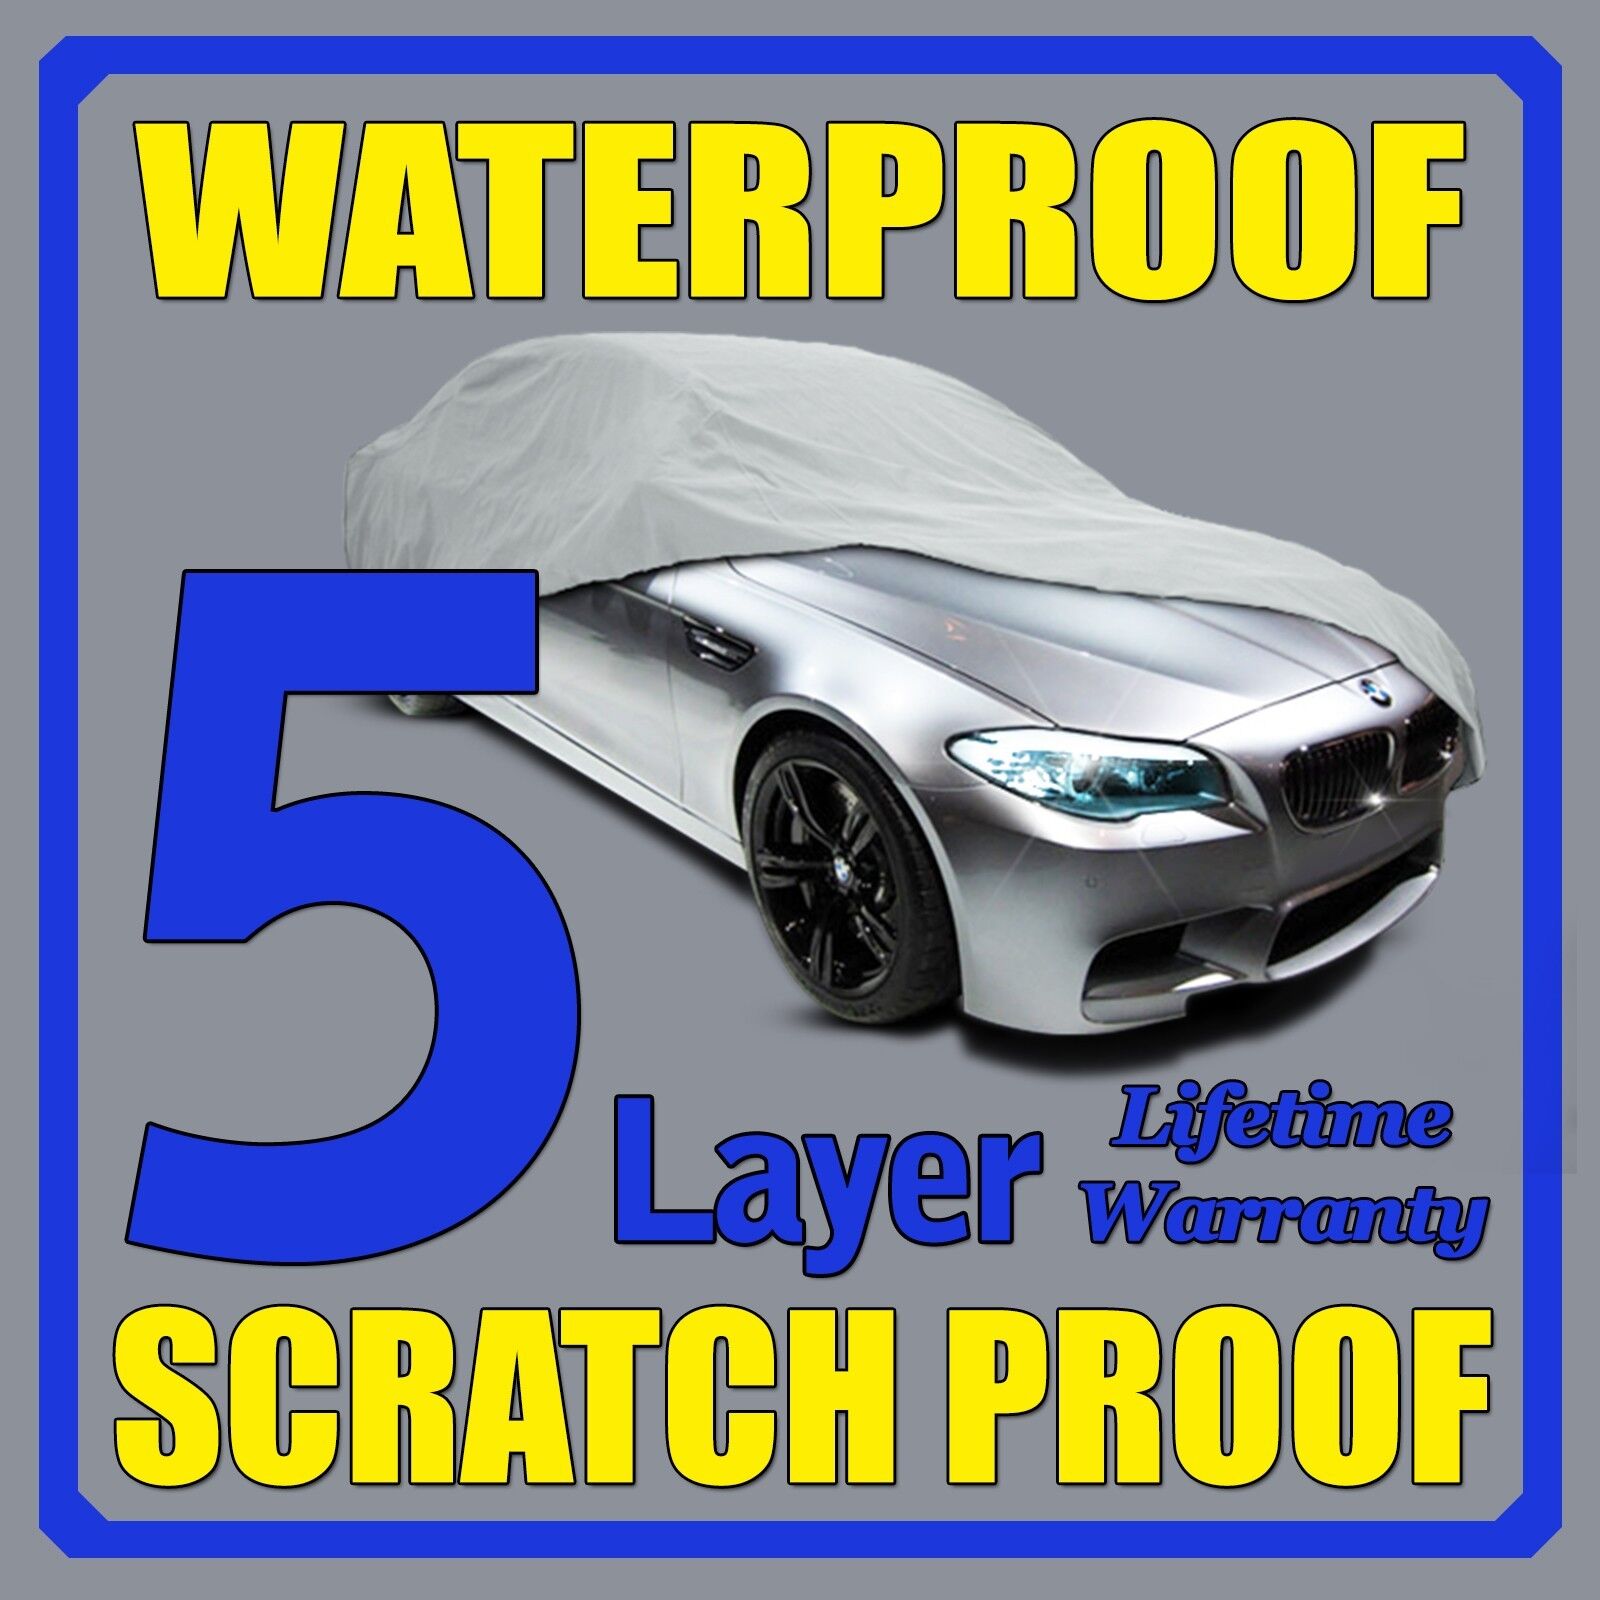 CAR COVER FOR MERCEDES BENZ S550 2006 2007 2008 2009 2010 2011 2012 WATERPROOF